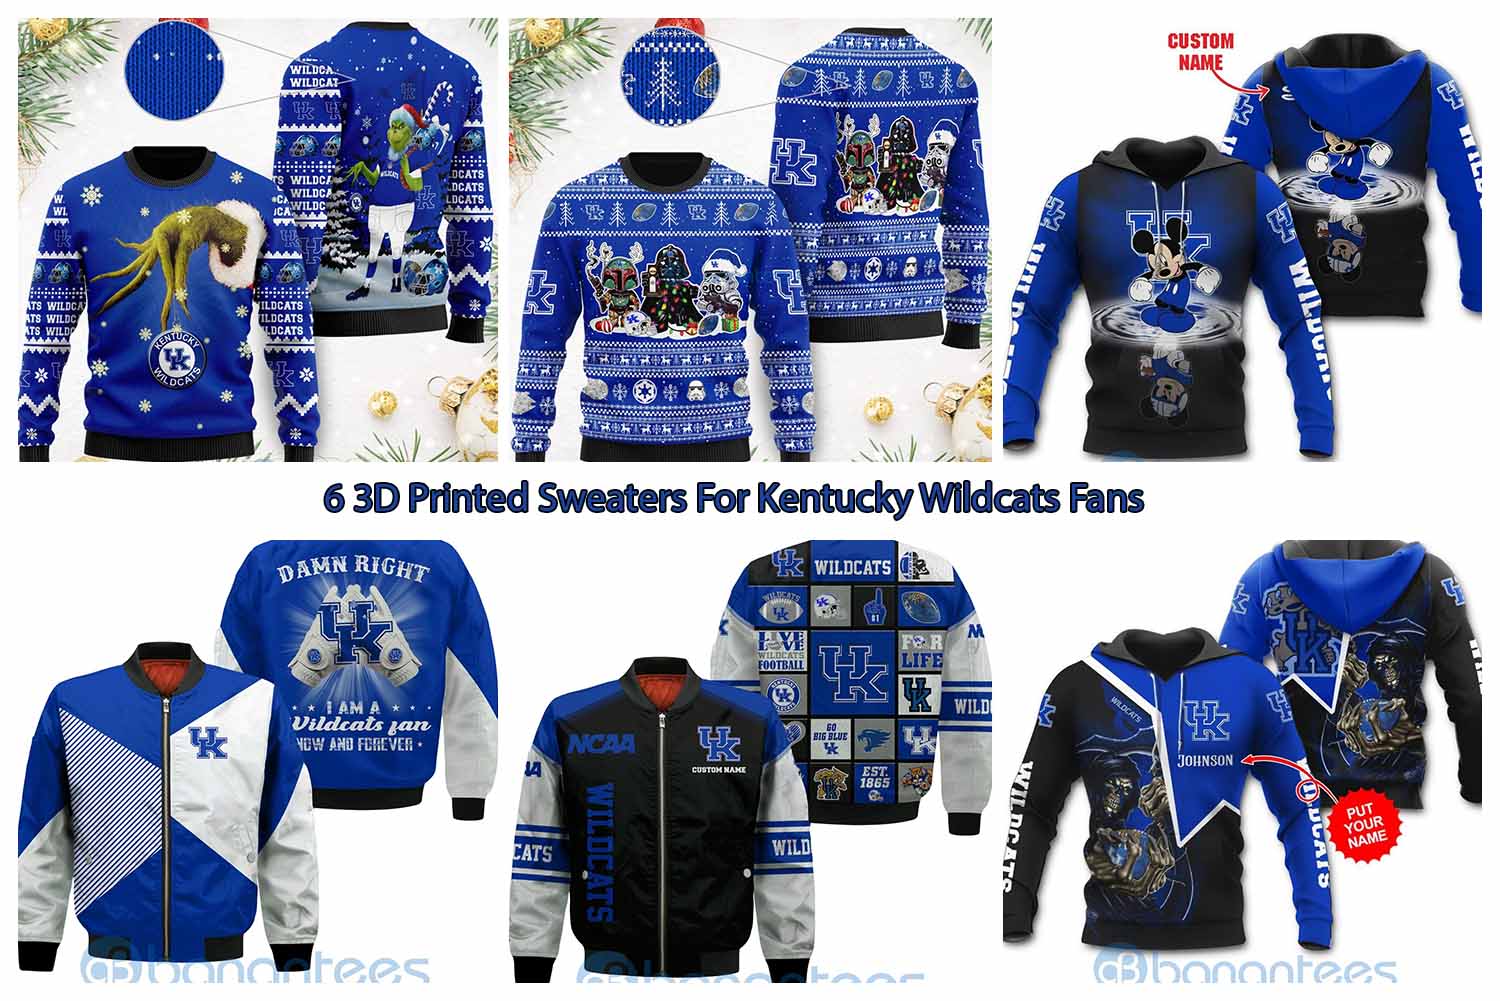 6 3D Printed Sweaters For Kentucky Wildcats Fans